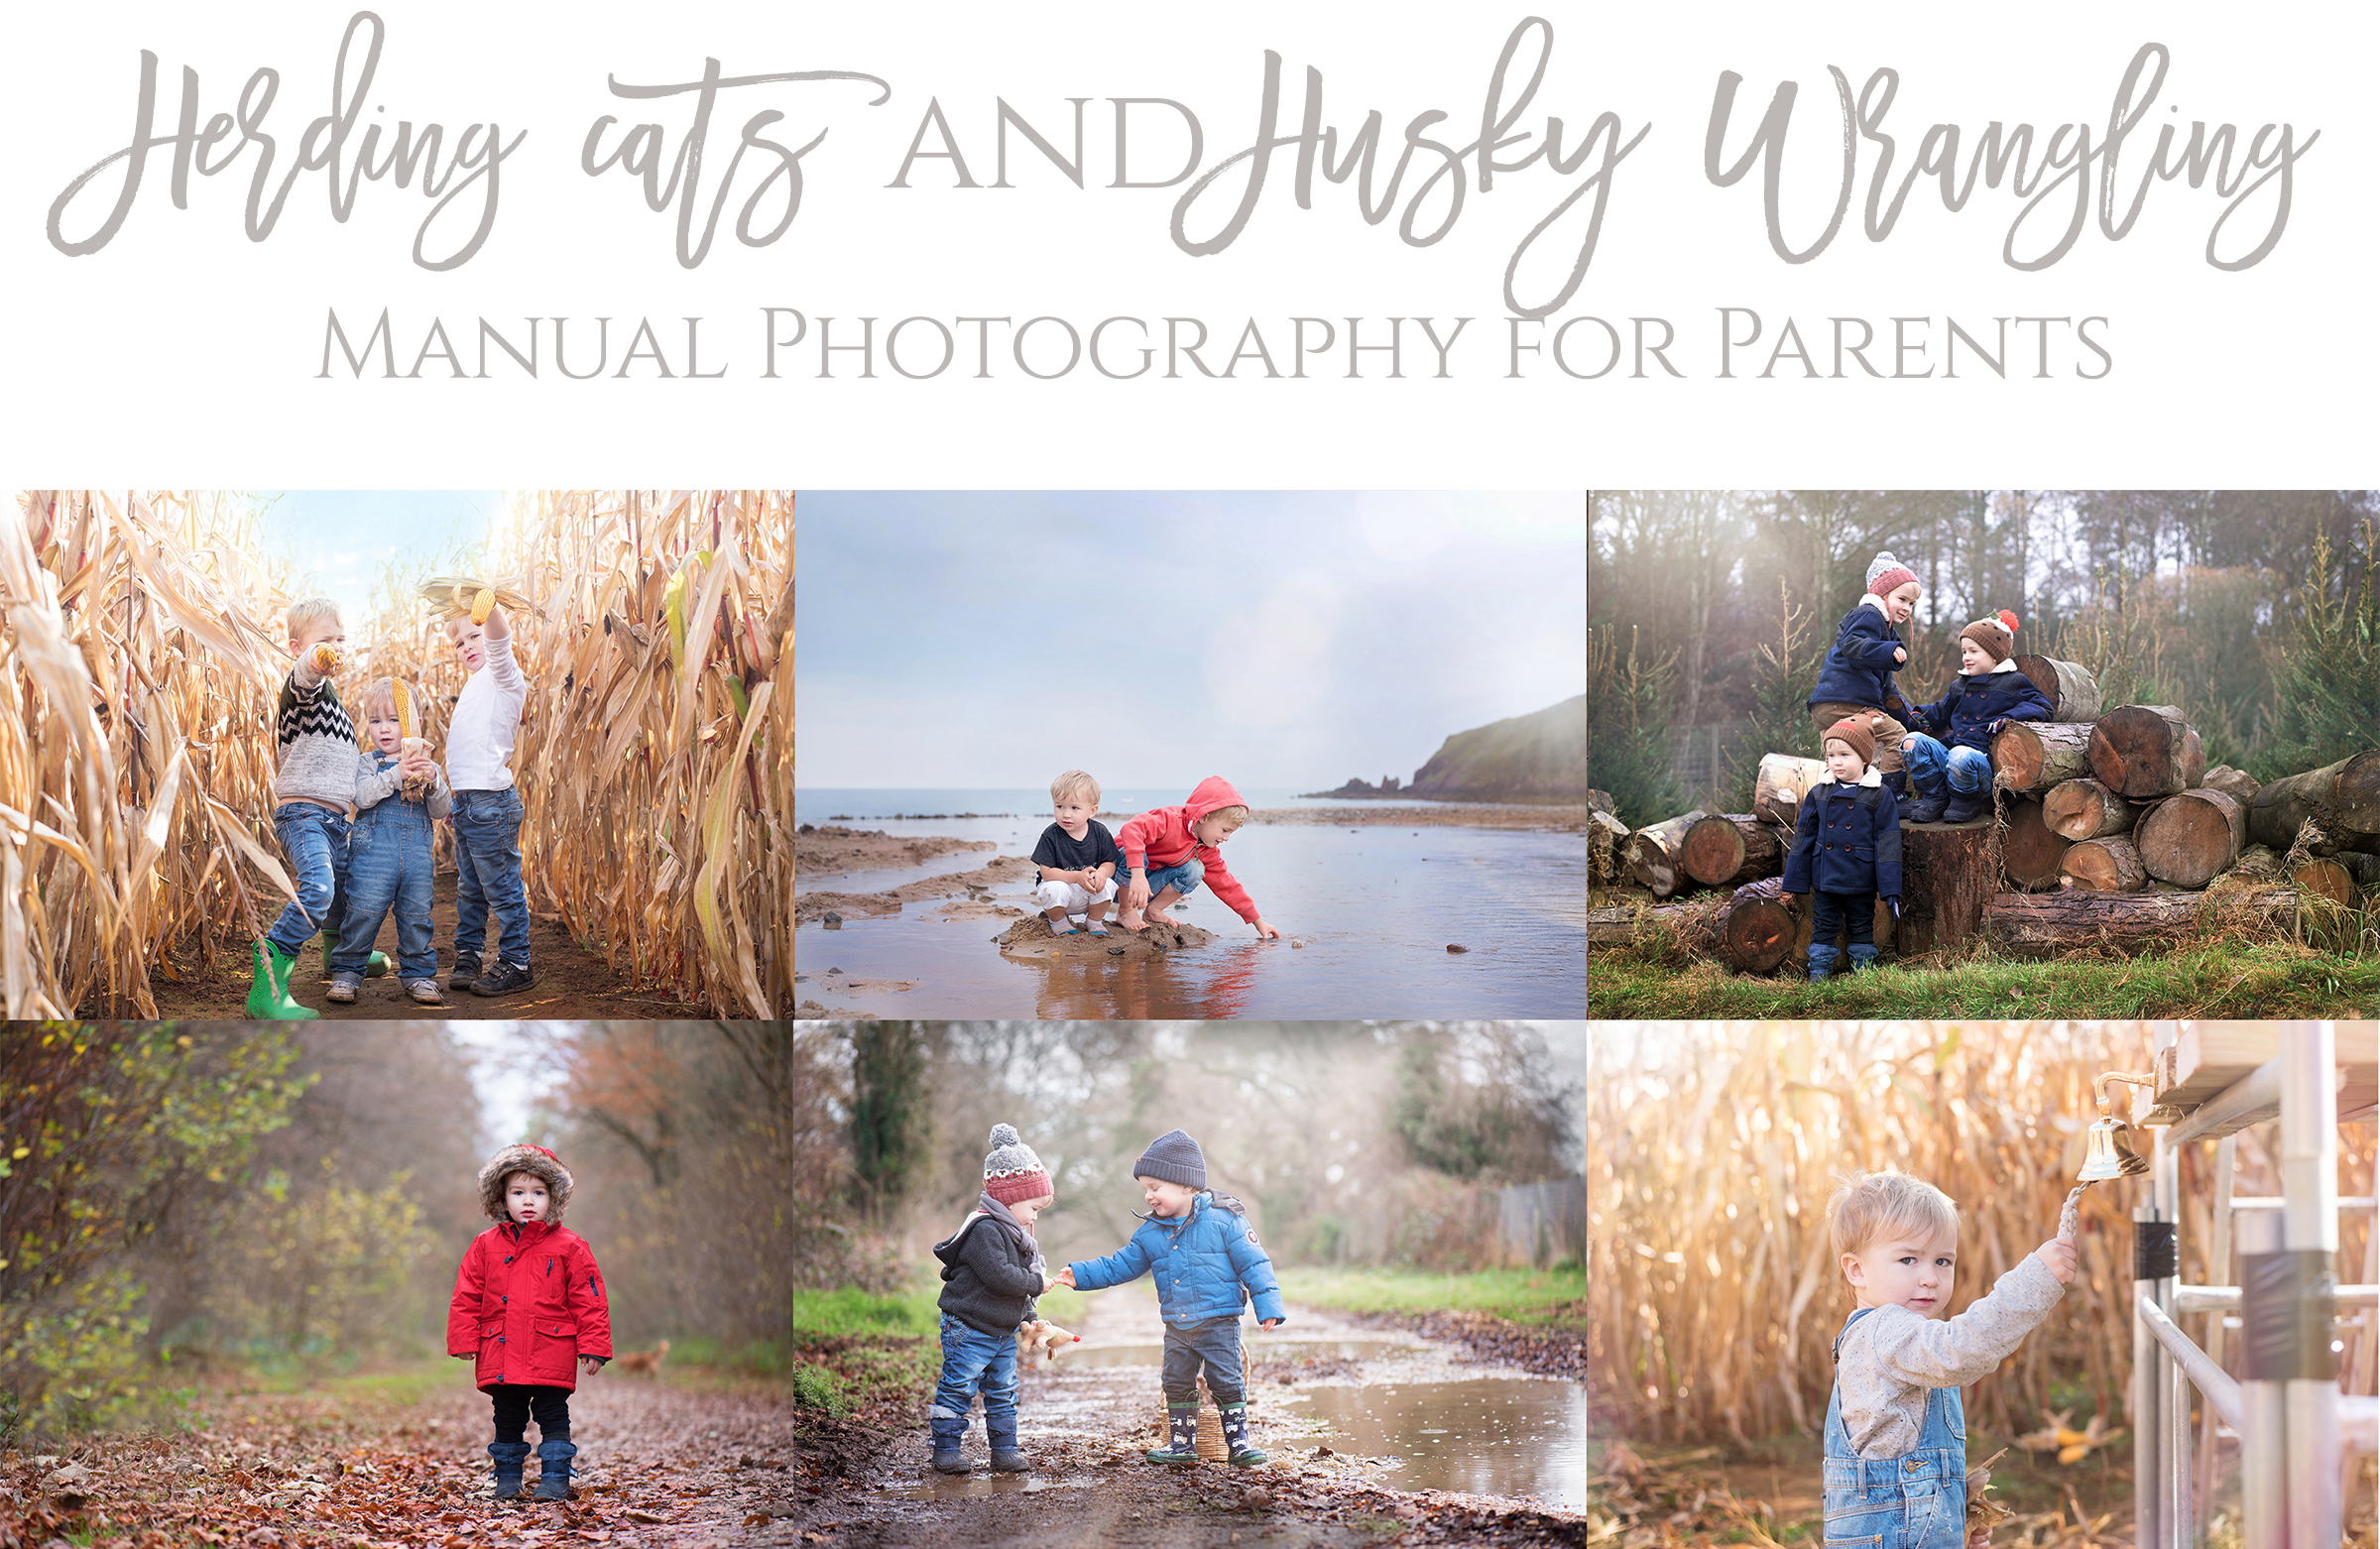 ONLINE MANUAL PHOTOGRAPHY COURSE FOR PARENTS